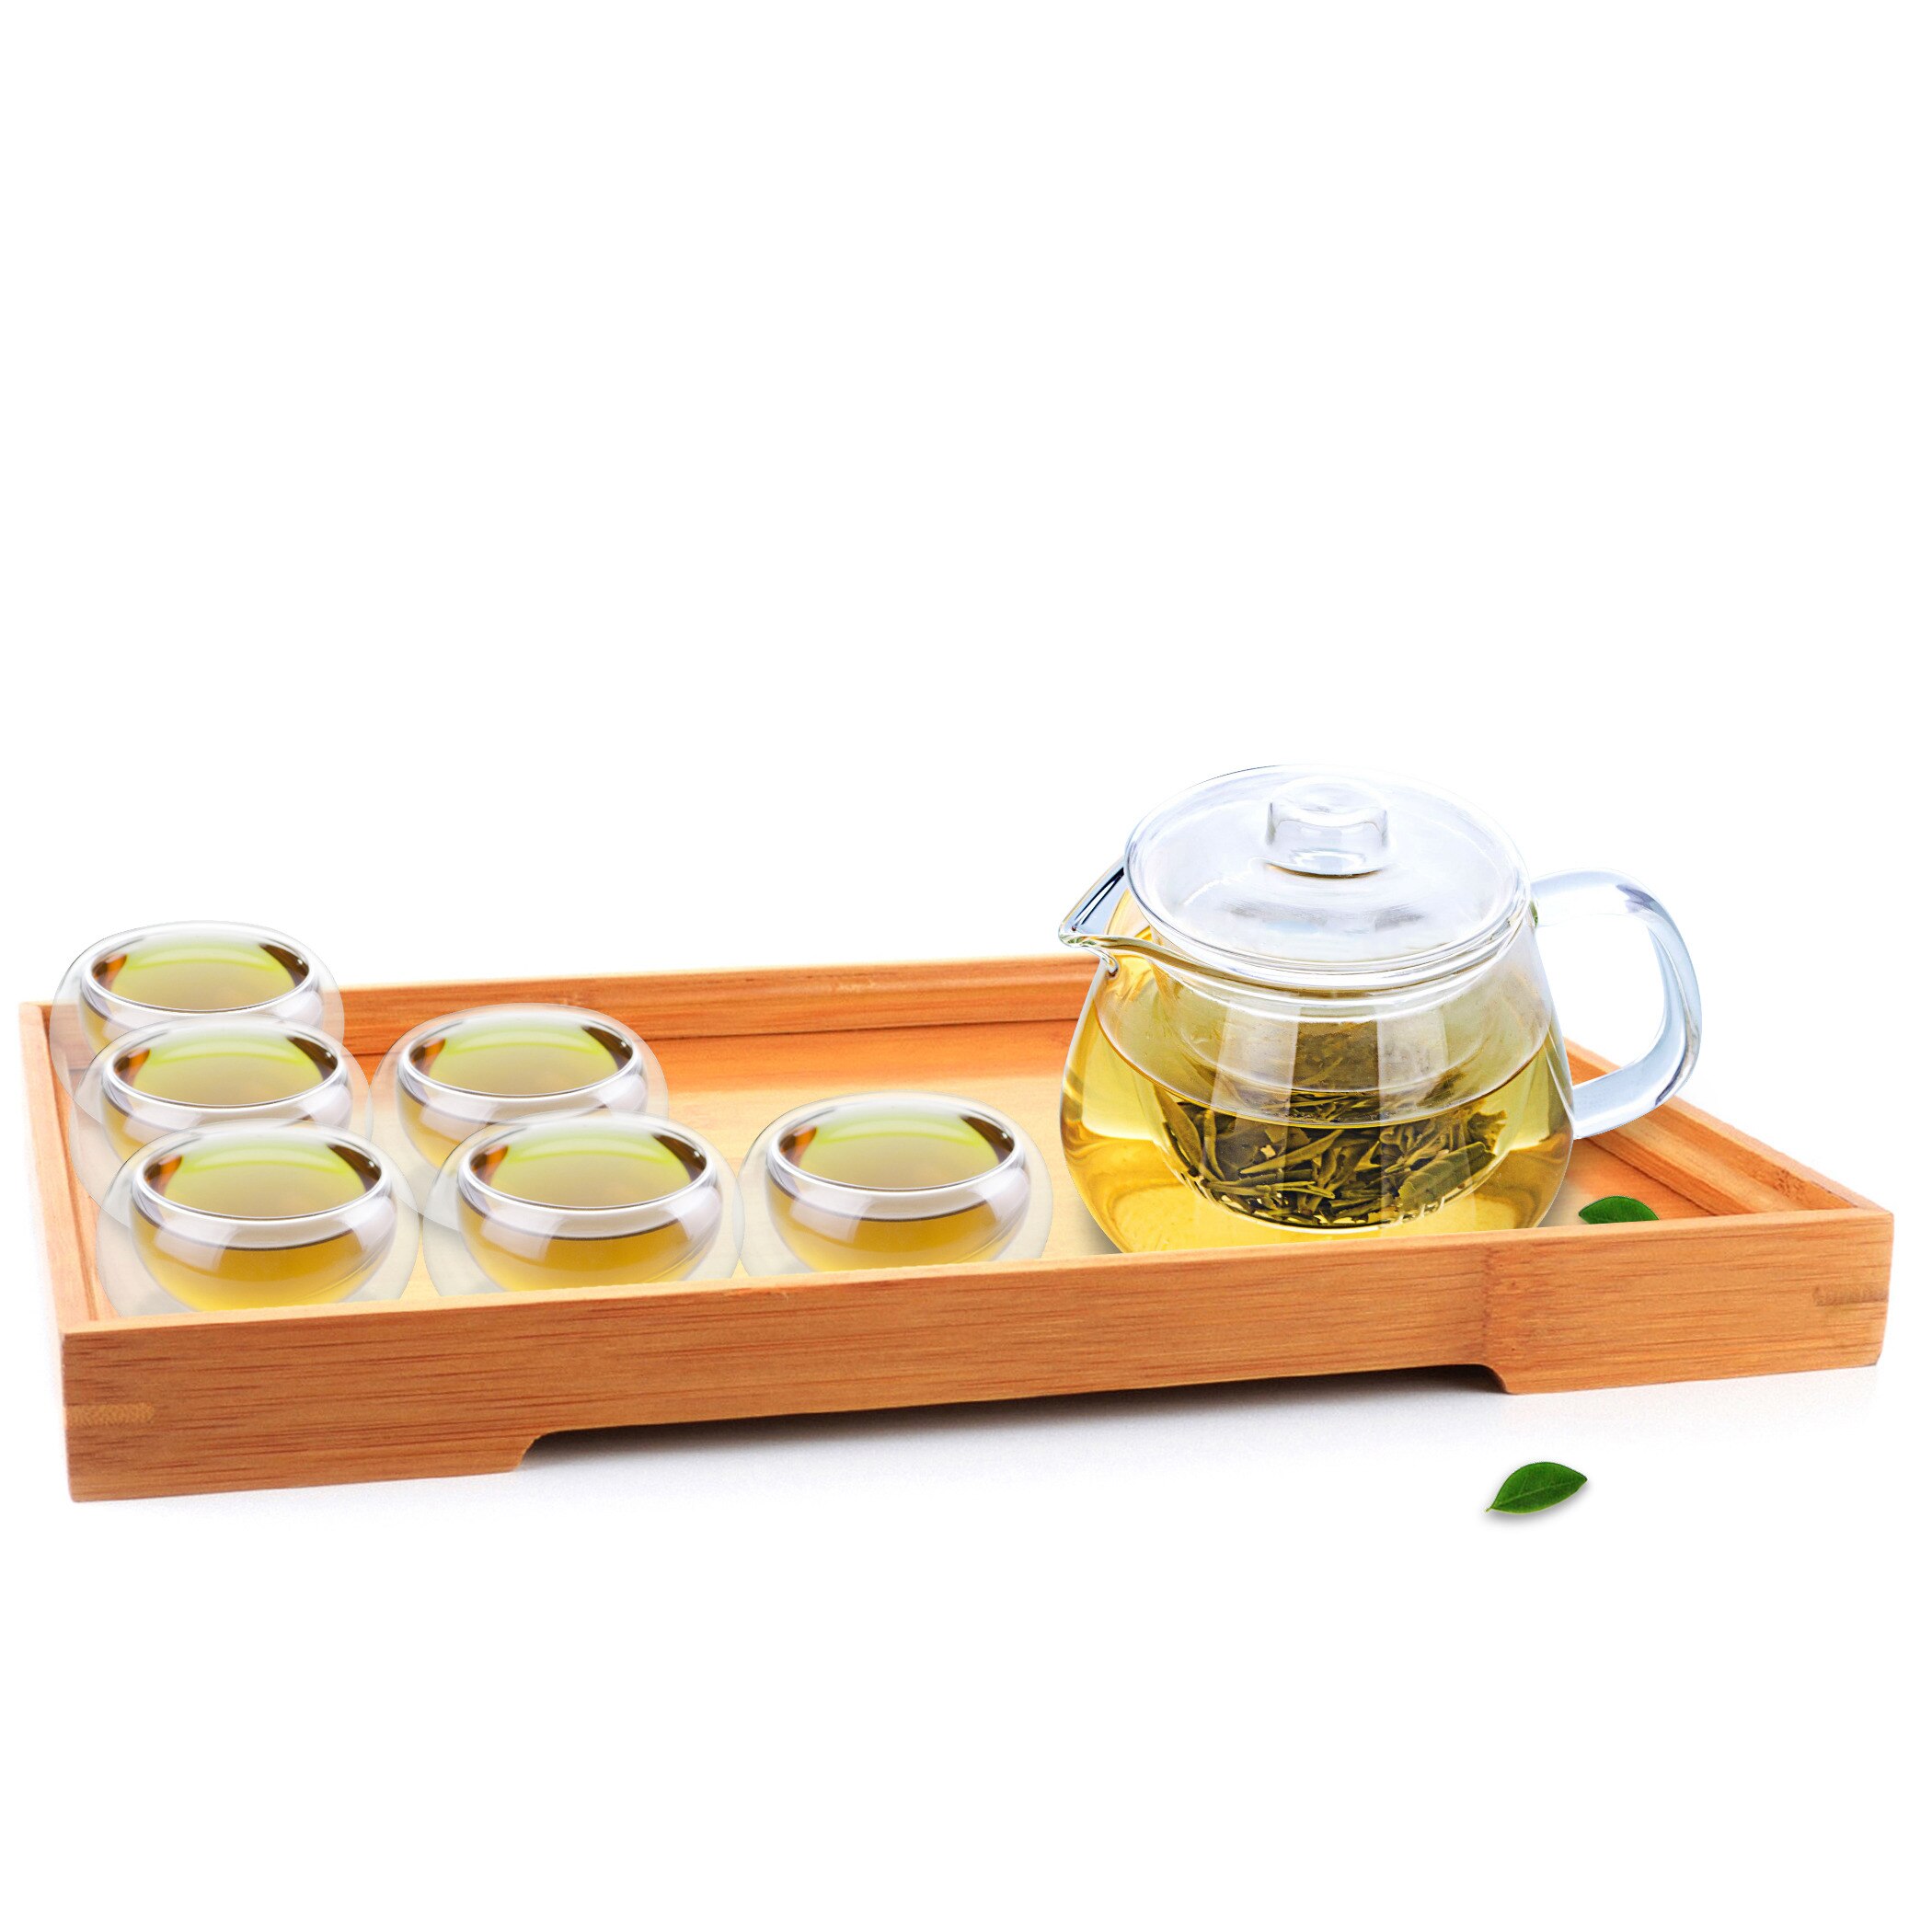 1x 8in1 Kung Fu Koffie Thee Set -485Ml Hittebestendige Glas Thee Pot + 6 Double Wall layer Thee Cups + Gong Fu Bamboe Lade